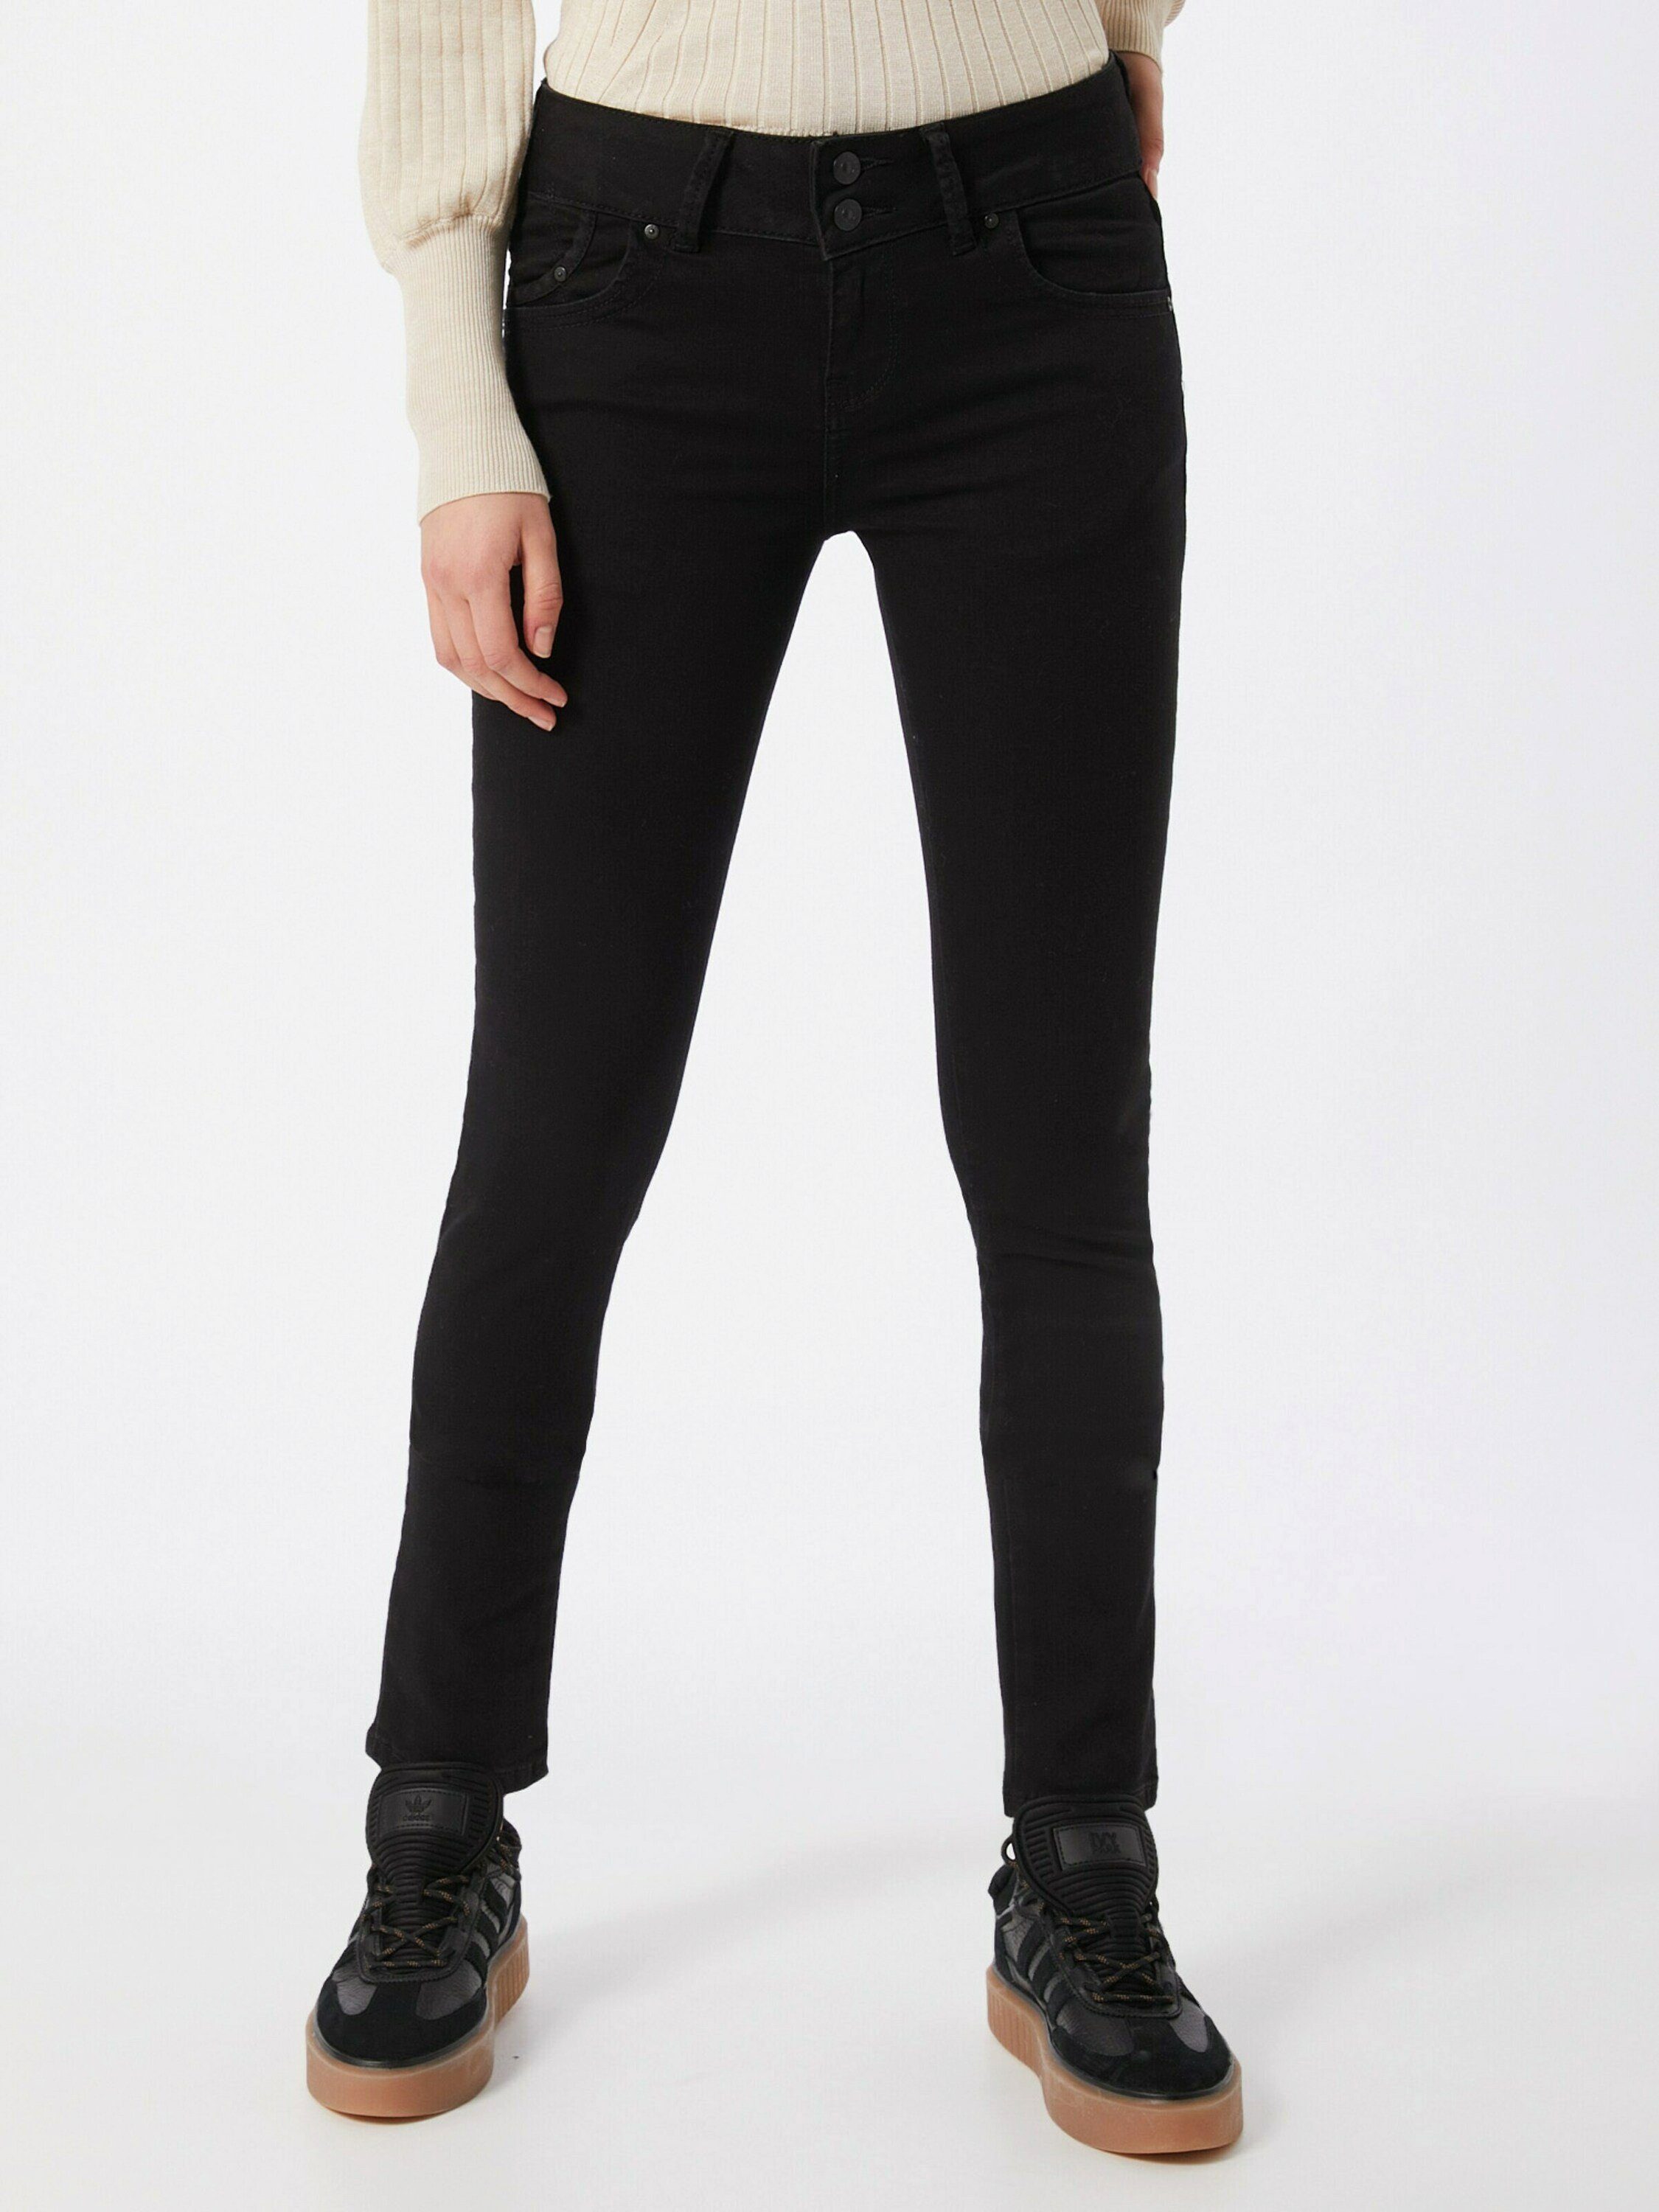 LTB (1-tlg) Details, Weiteres Molly Cut-Outs Plain/ohne Detail, Slim-fit-Jeans